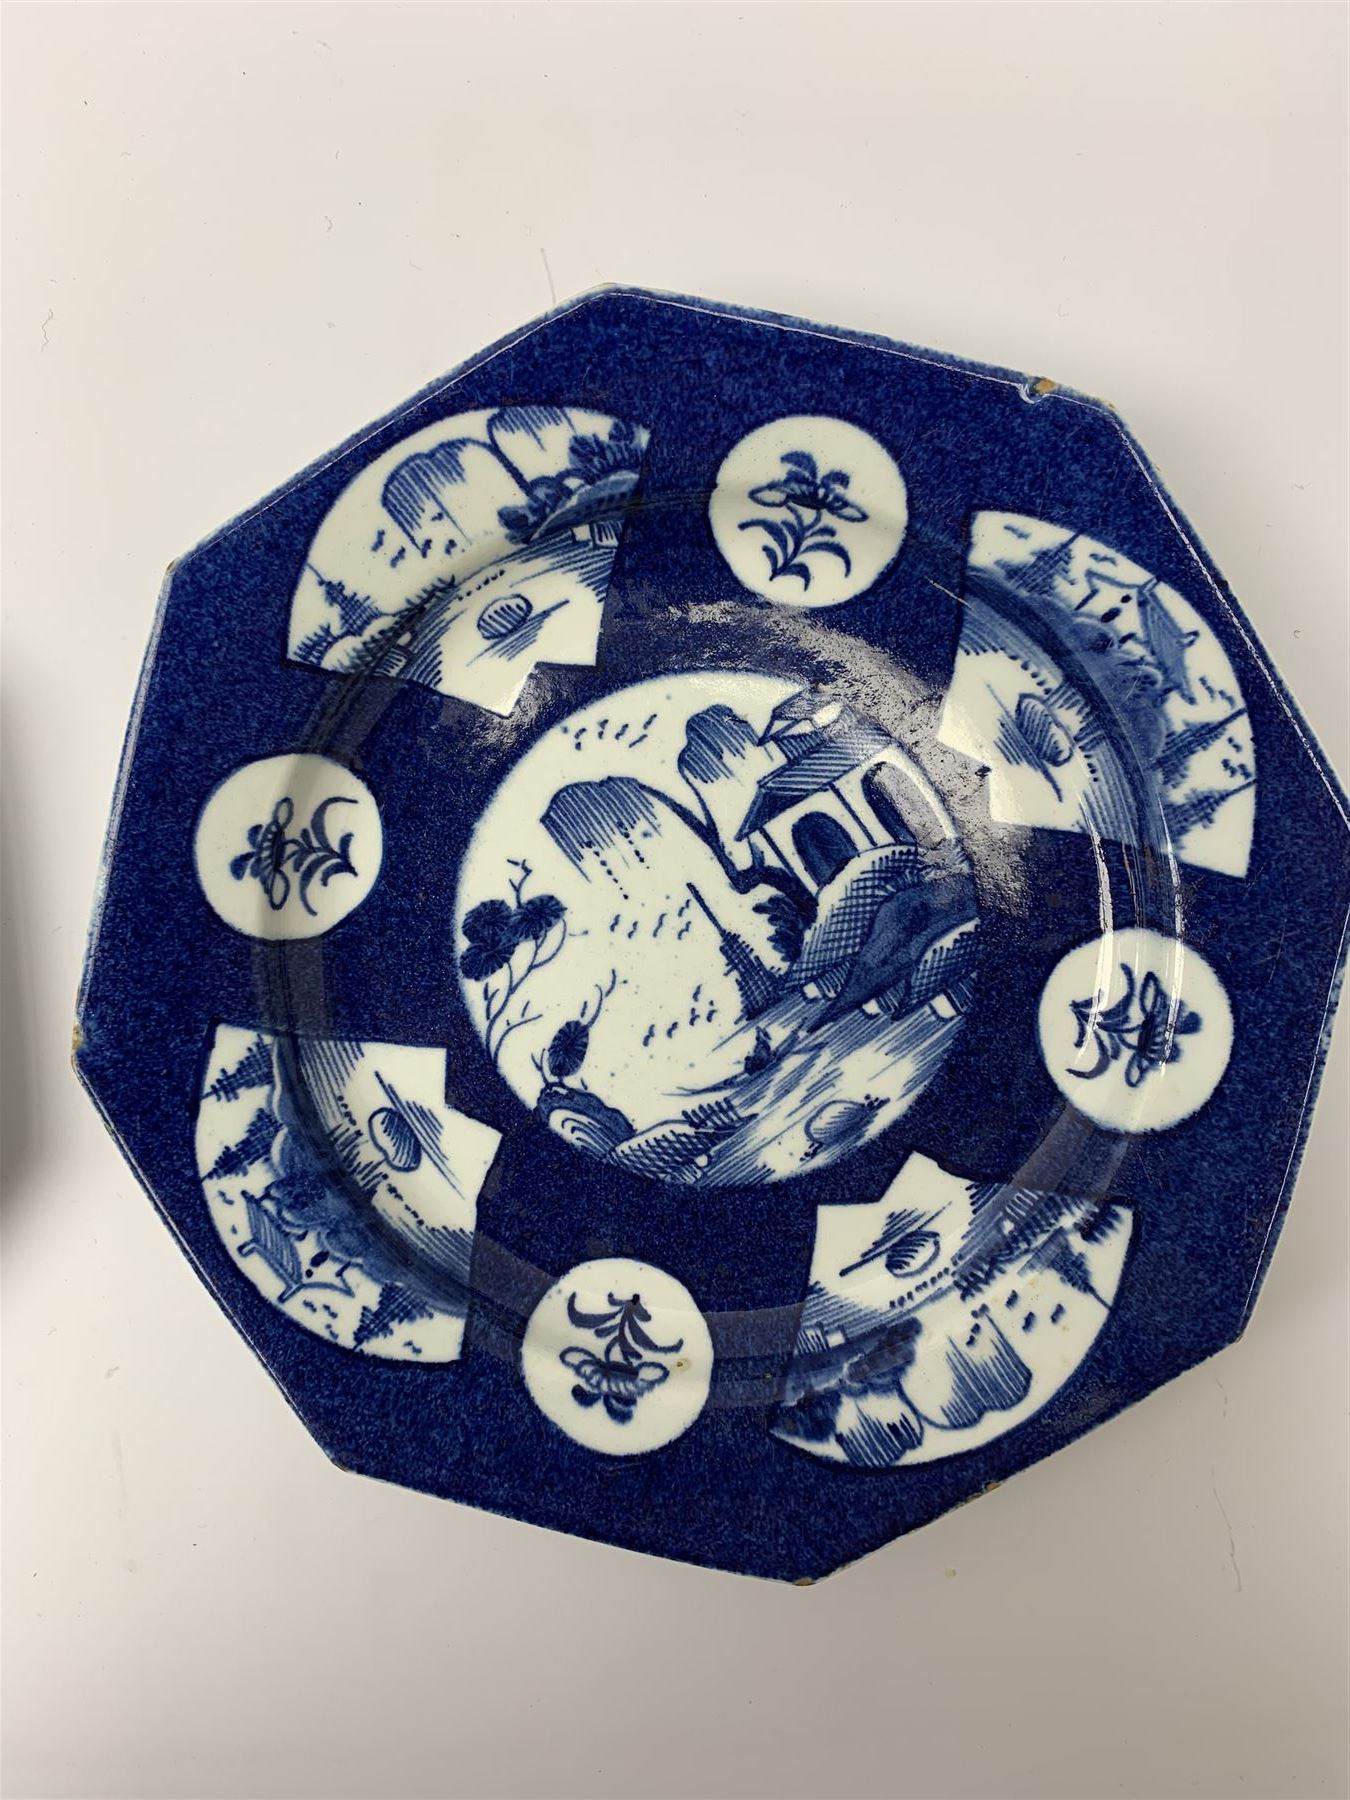 Mid 18th century Bow porcelain plate - Image 8 of 8